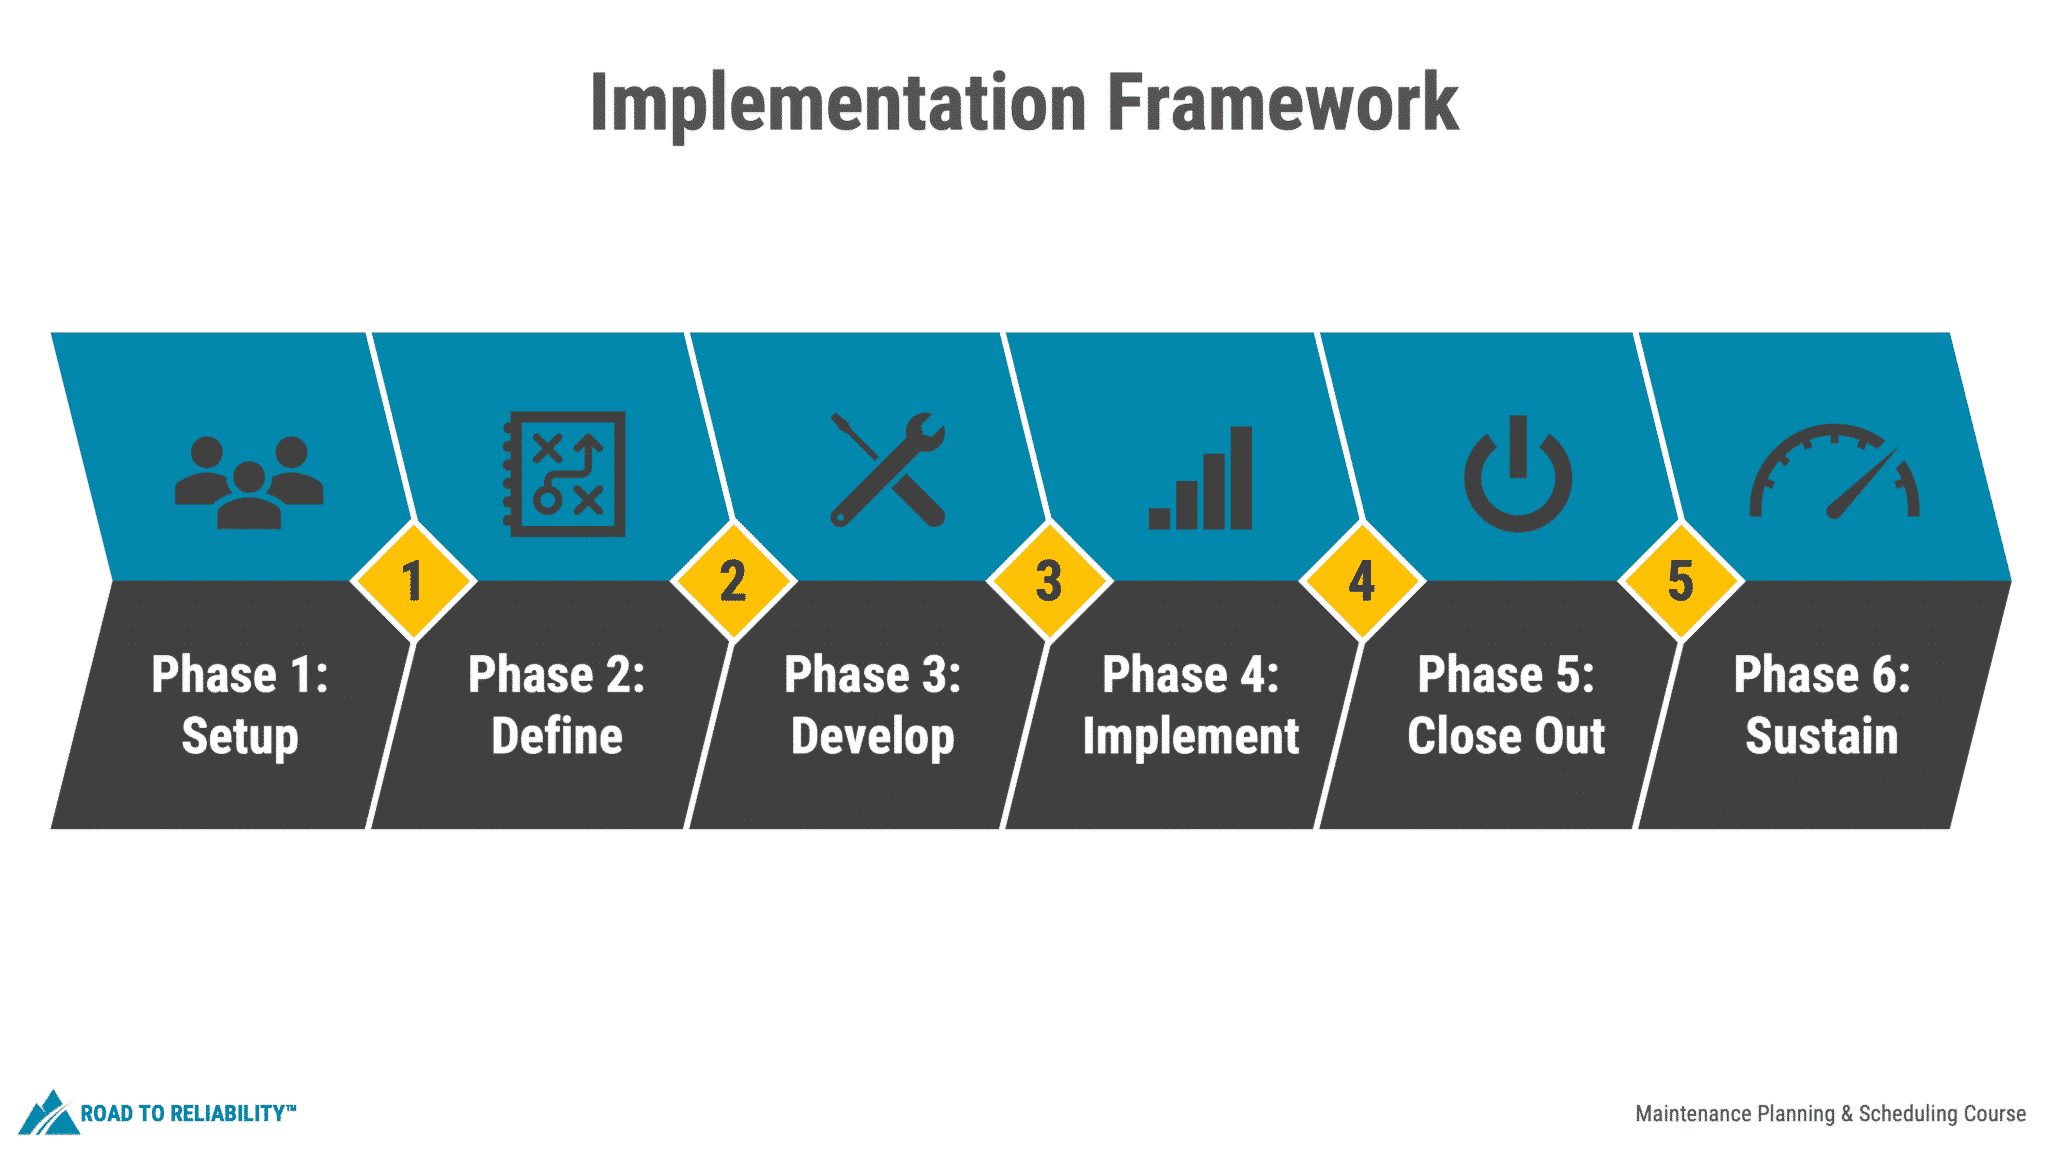 Implementation framework used in our maintenance planning and scheduling online training course